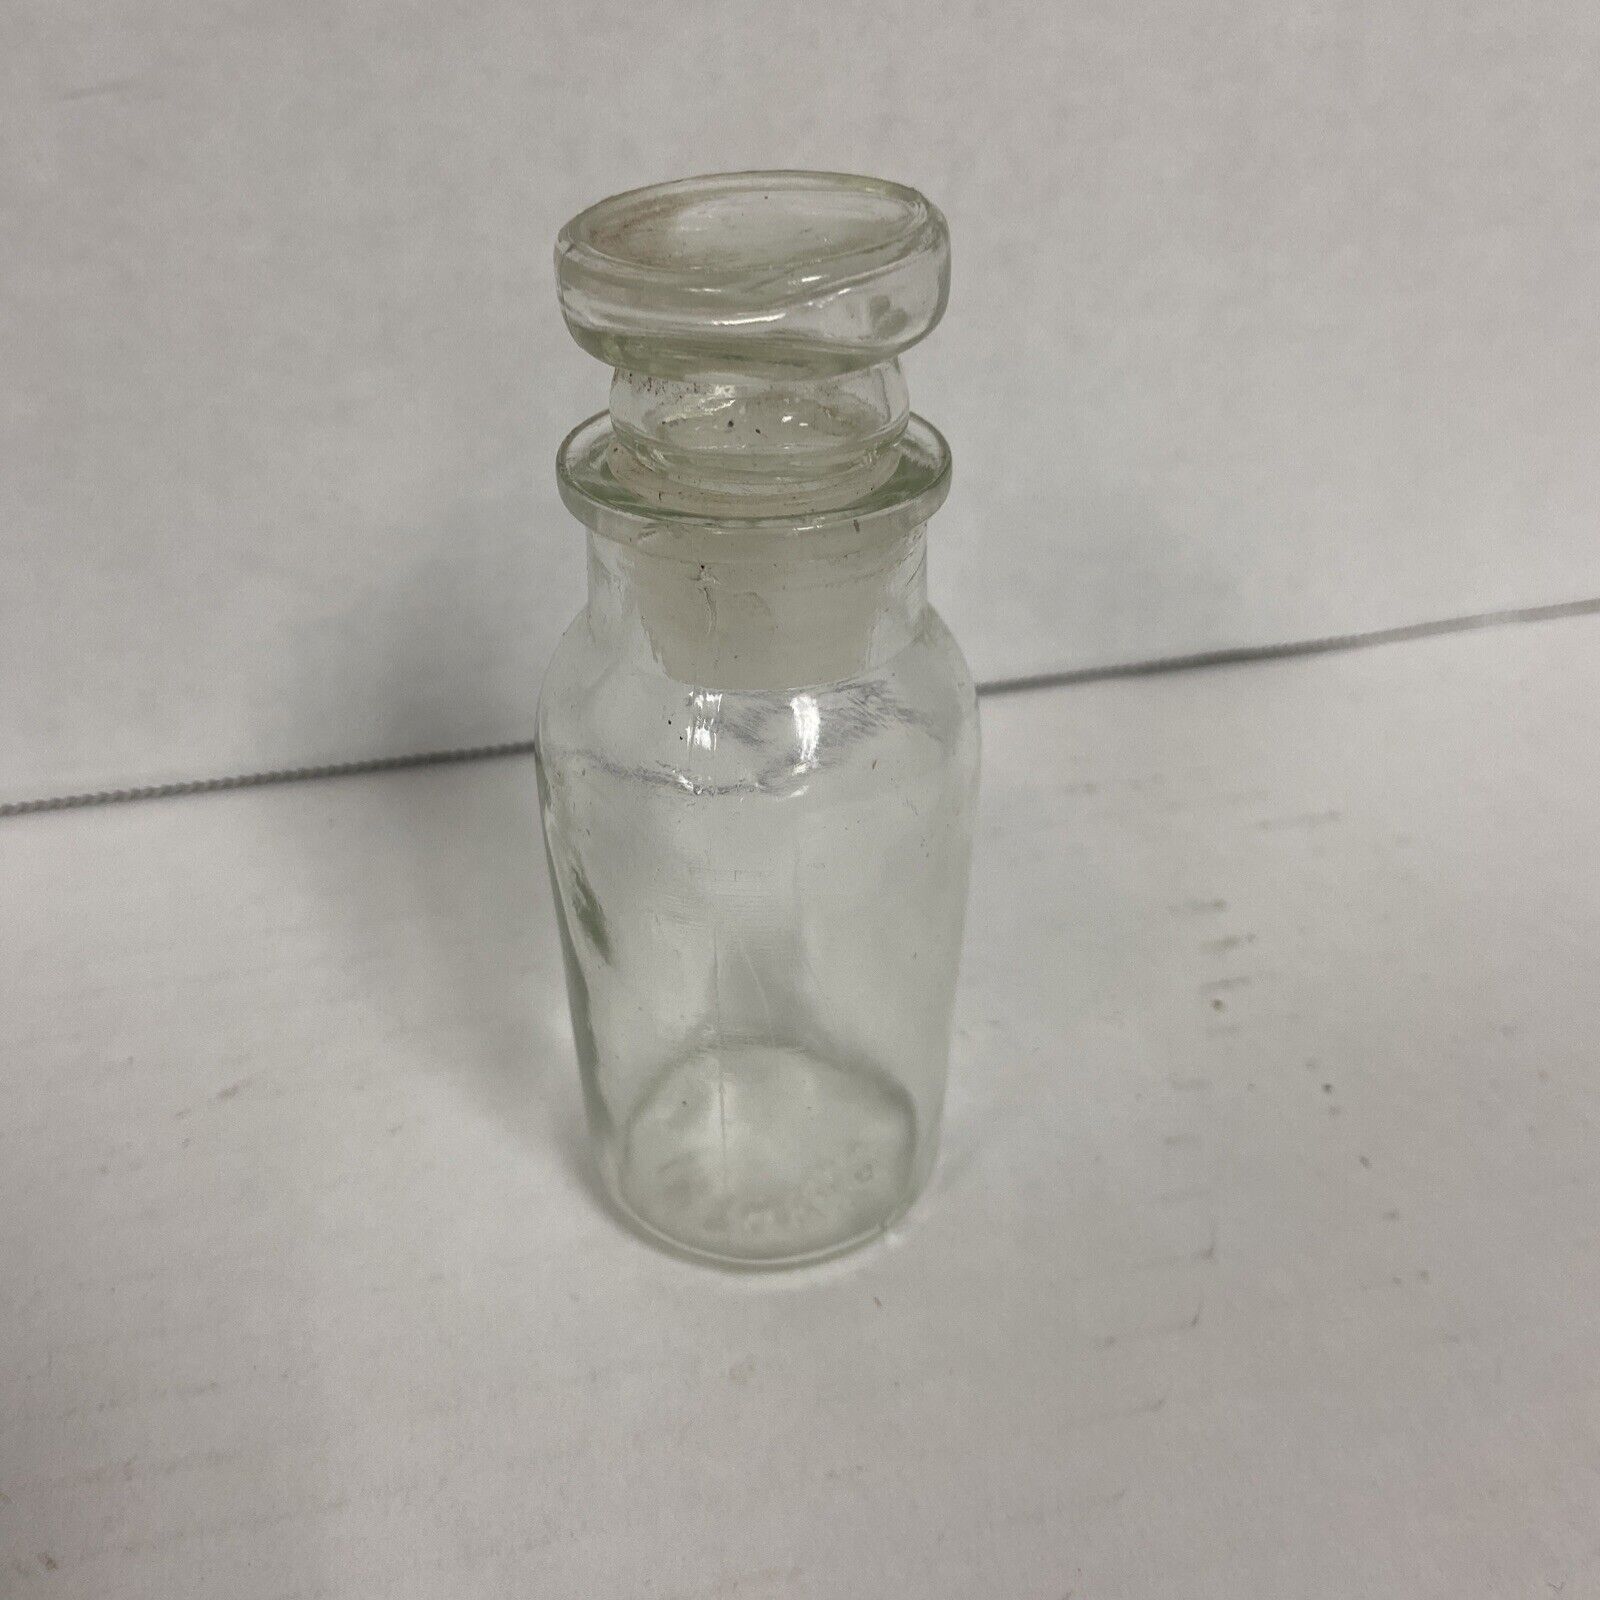 Vintage Glass Spice Apothecary Jar with Lid Stopper